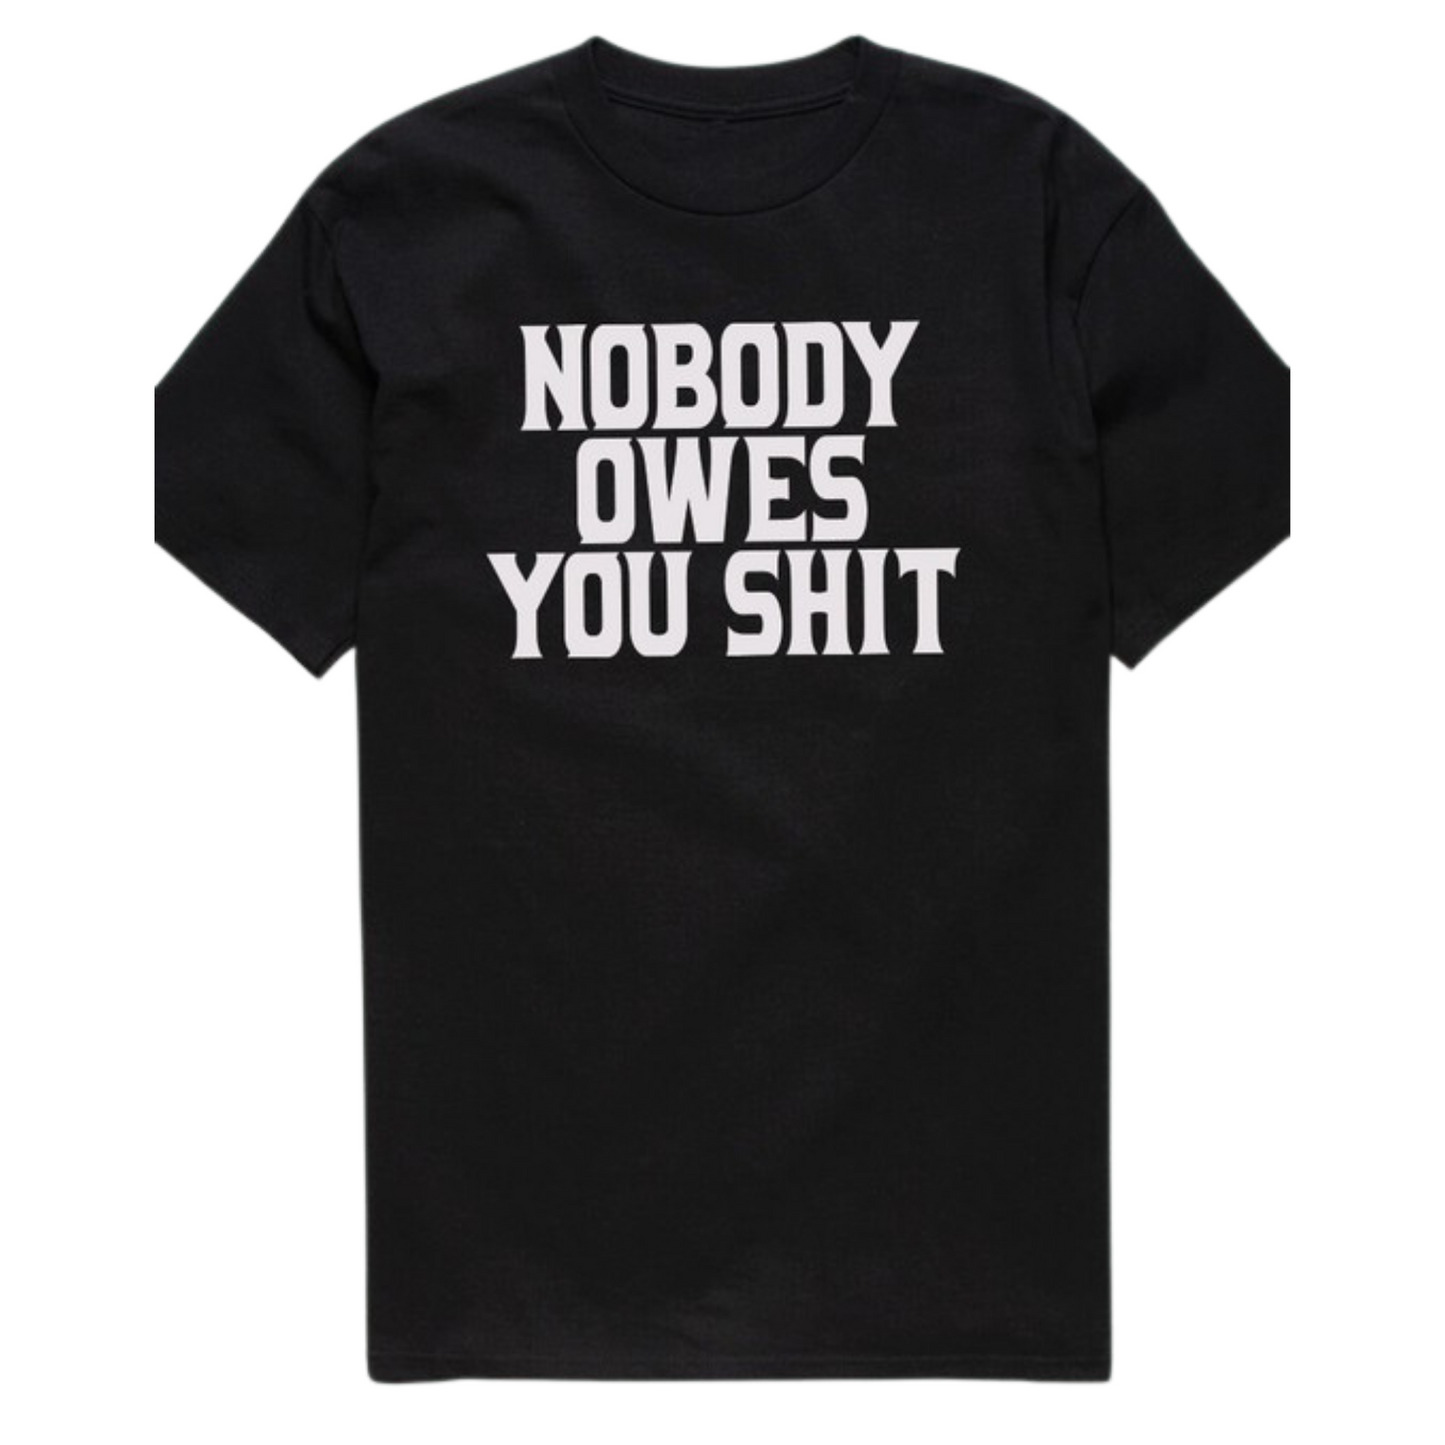 "Nobody Owes You Shit" Graphic Tee Black (S-XL)